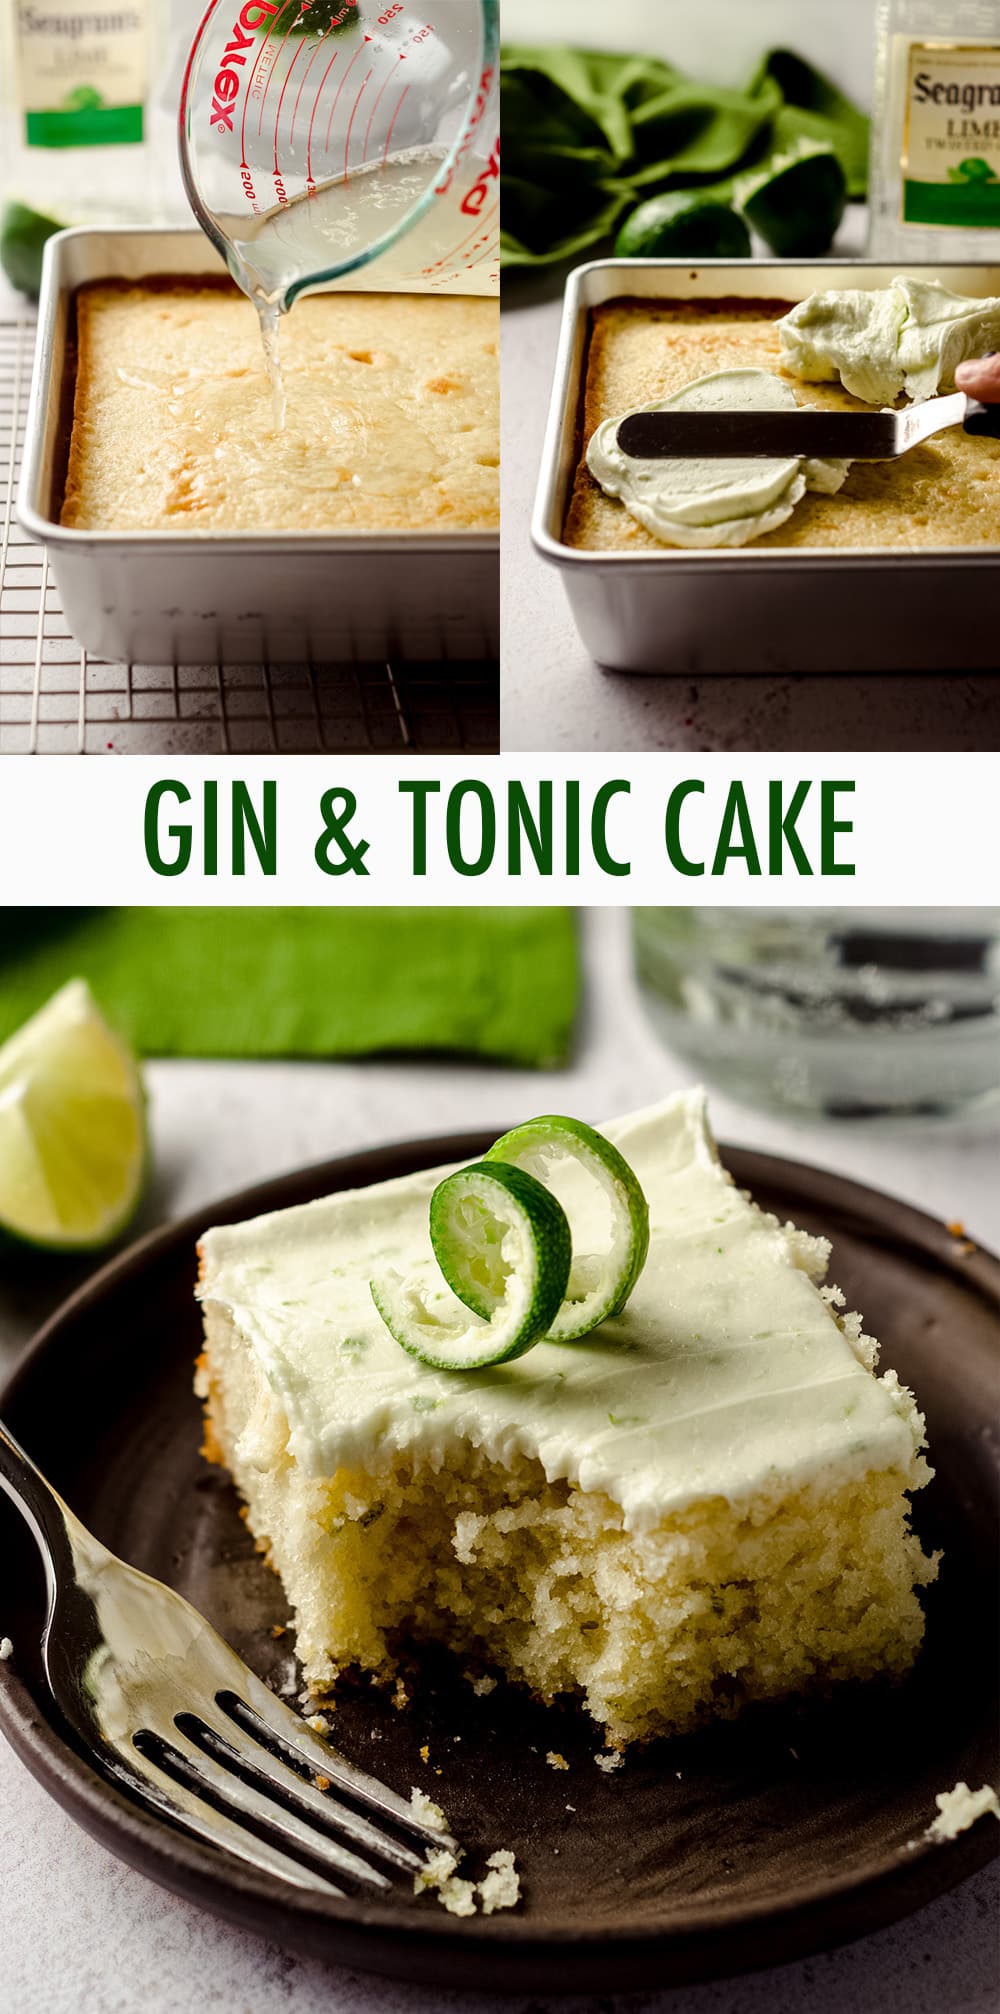 A moist and flavorful lime cake soaked in a gin syrup and slathered with a boozy, lime frosting. via @frshaprilflours